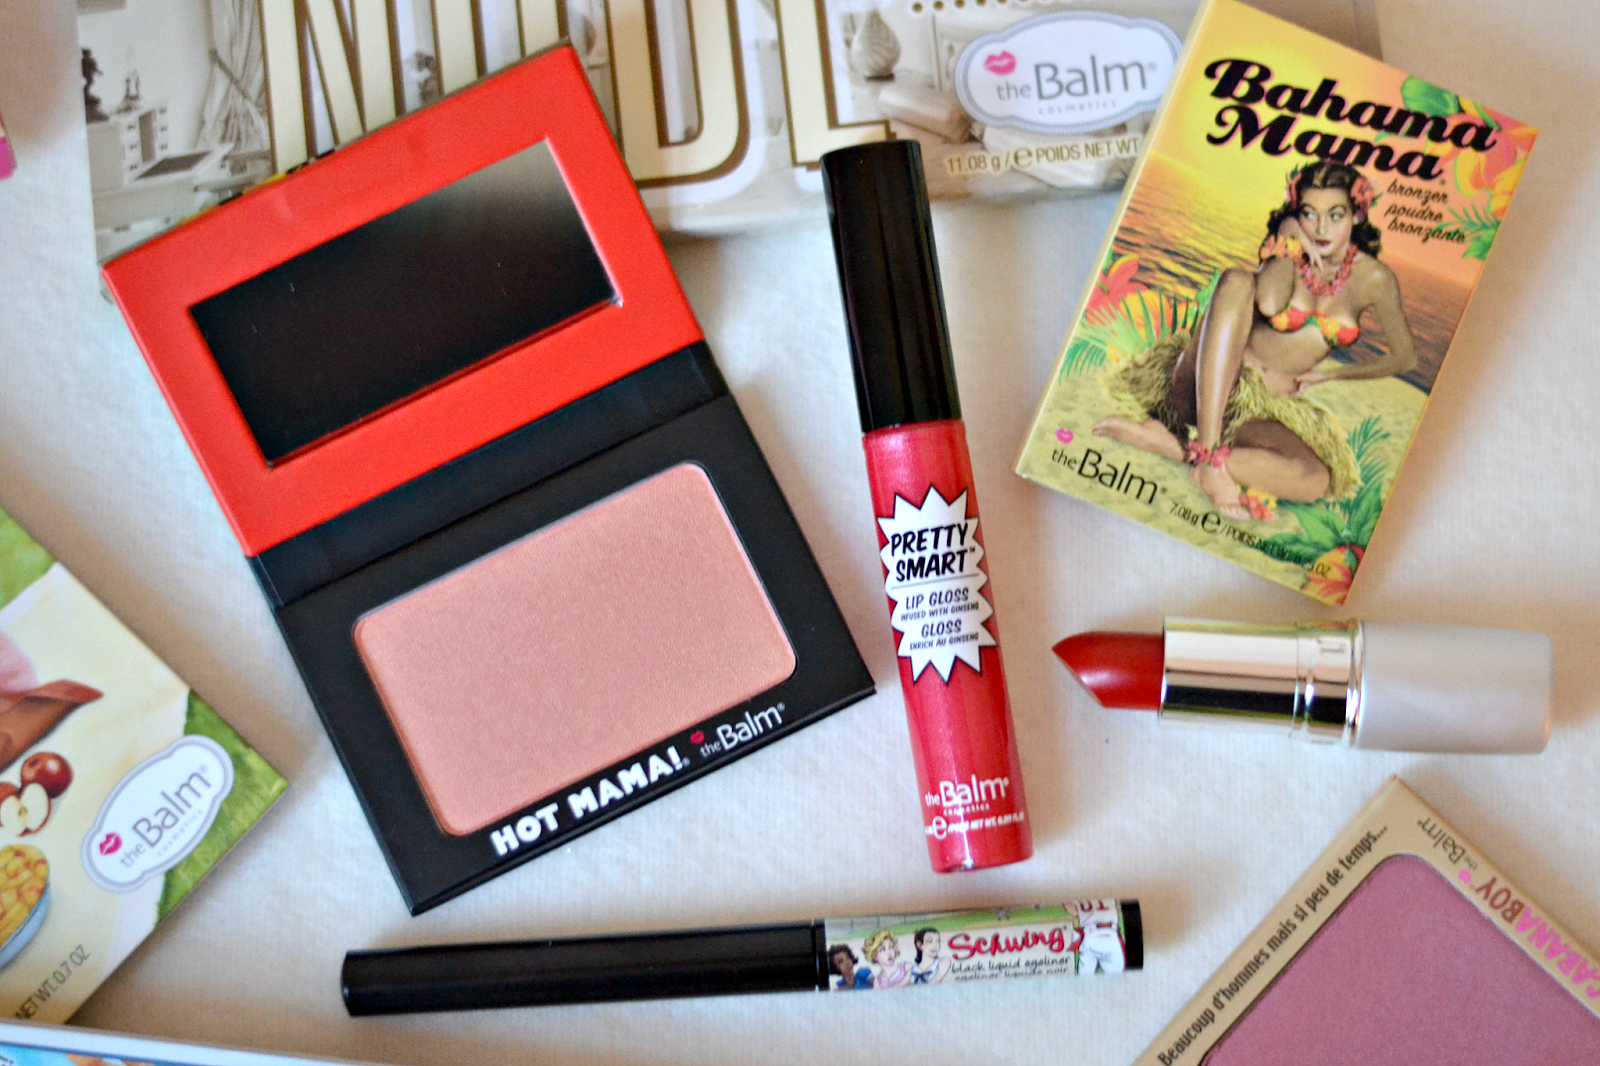 A Brand To Watch in 2015: The Balm (Fun, Quirky & Benefit 